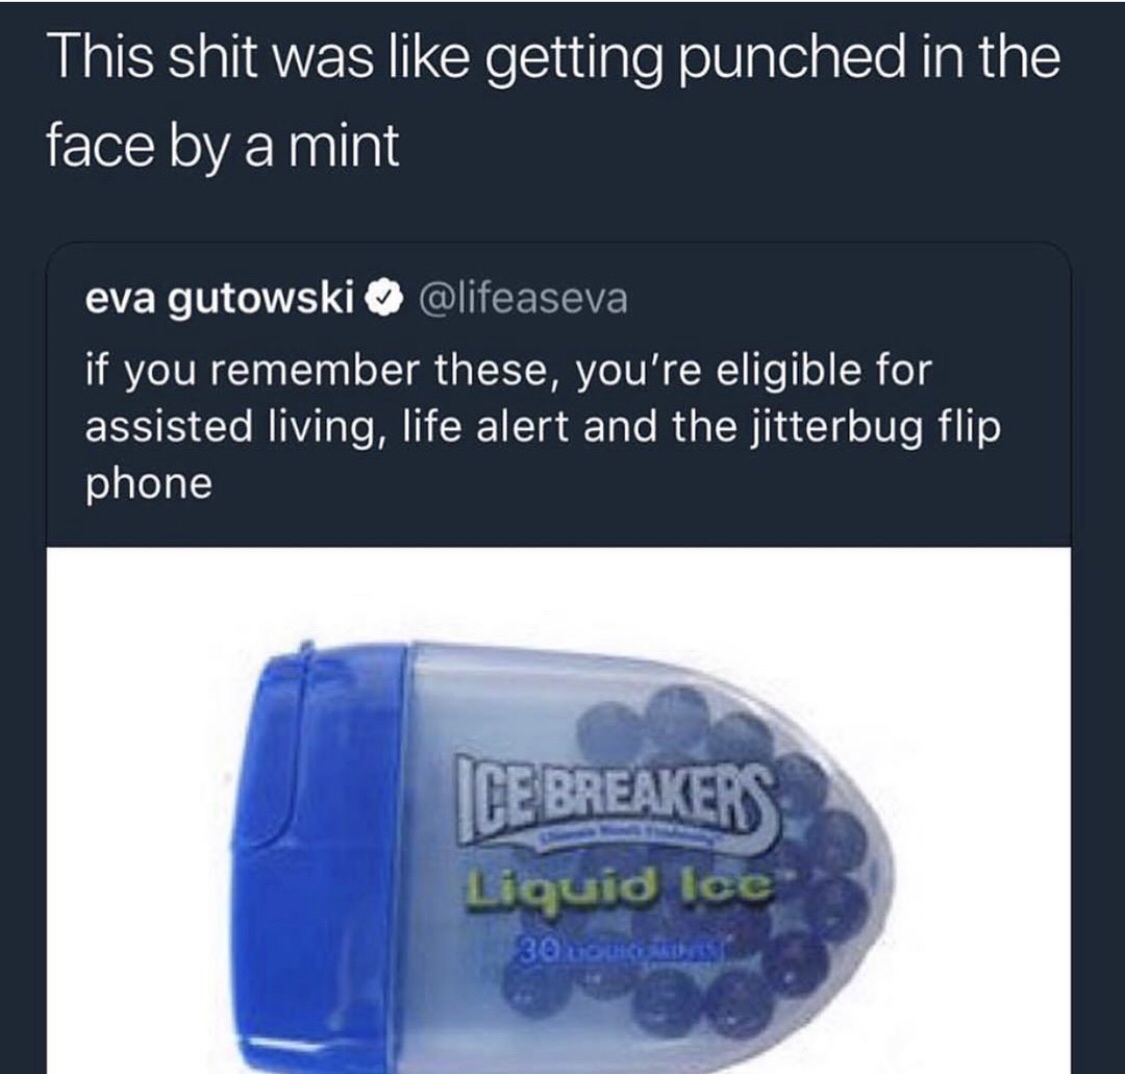 ice breakers - This shit was getting punched in the face by a mint eva gutowski if you remember these, you're eligible for assisted living, life alert and the jitterbug flip phone Cebreakers Liquid Ice 30